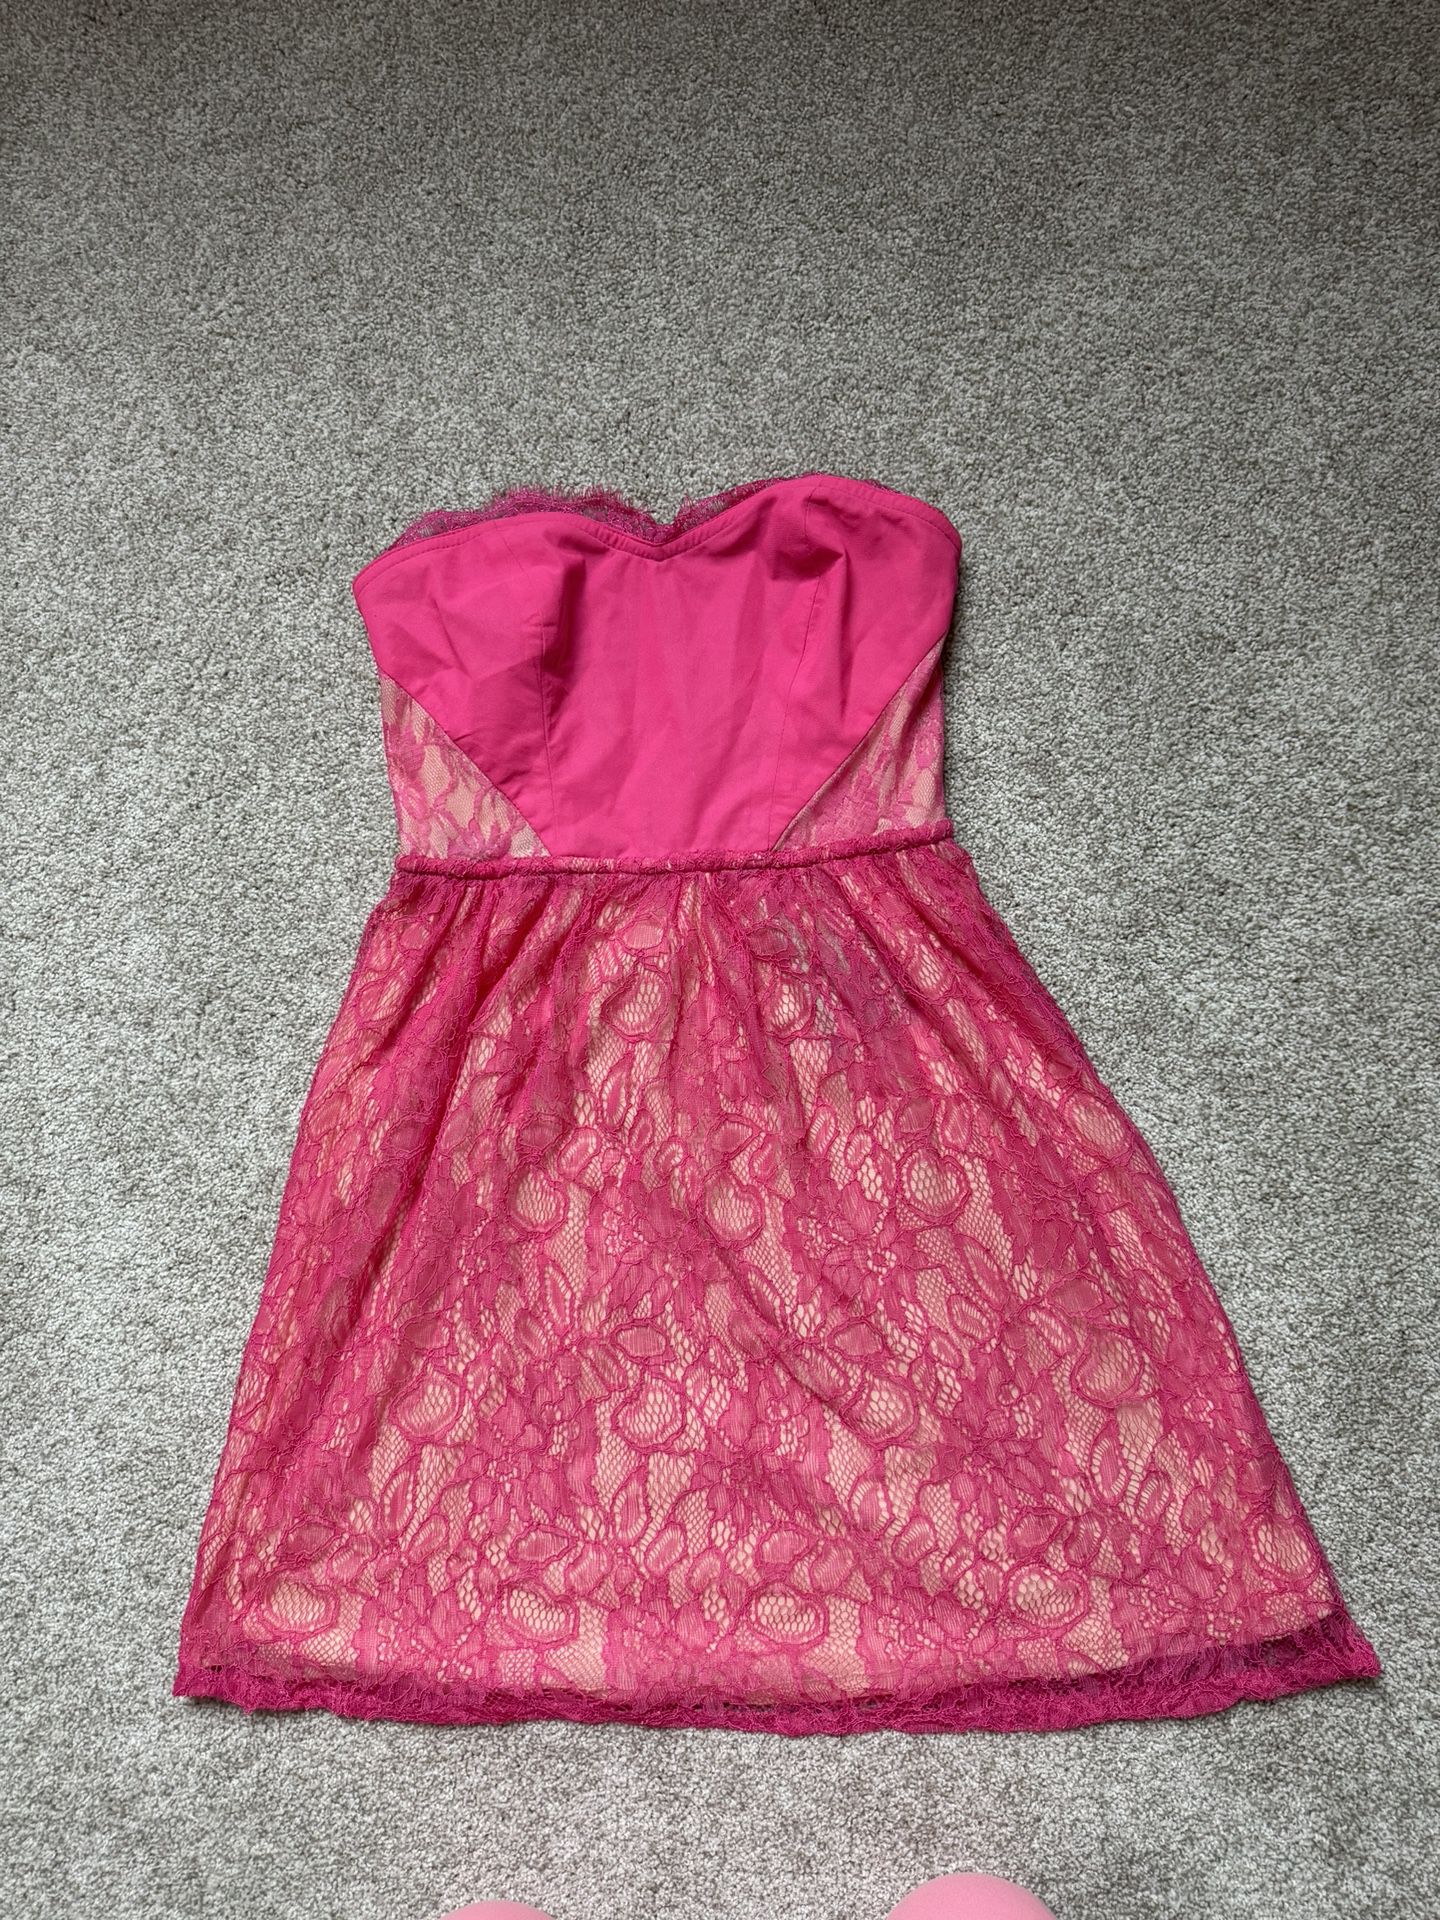 NEW Urban Outfitter Dress, Size XS